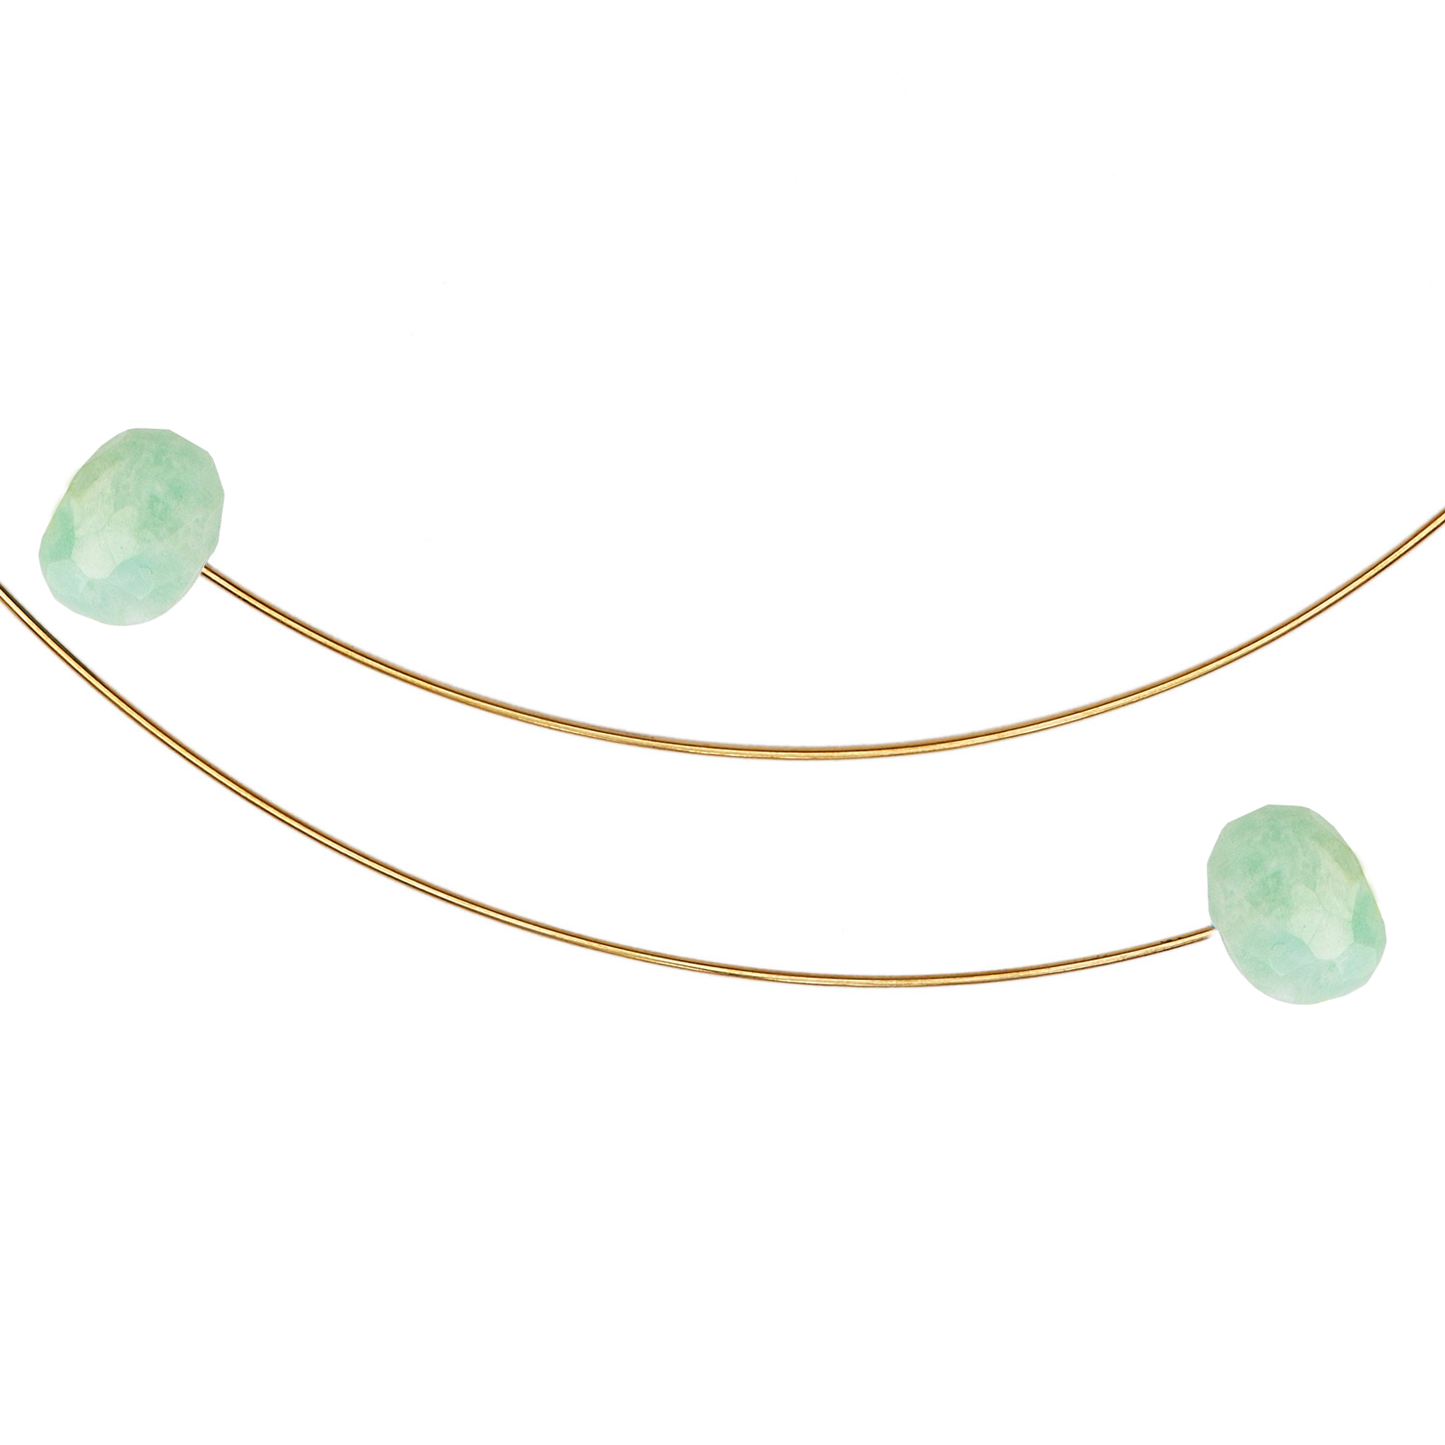 Asymmetric Neckwires with hand-cut gemstones